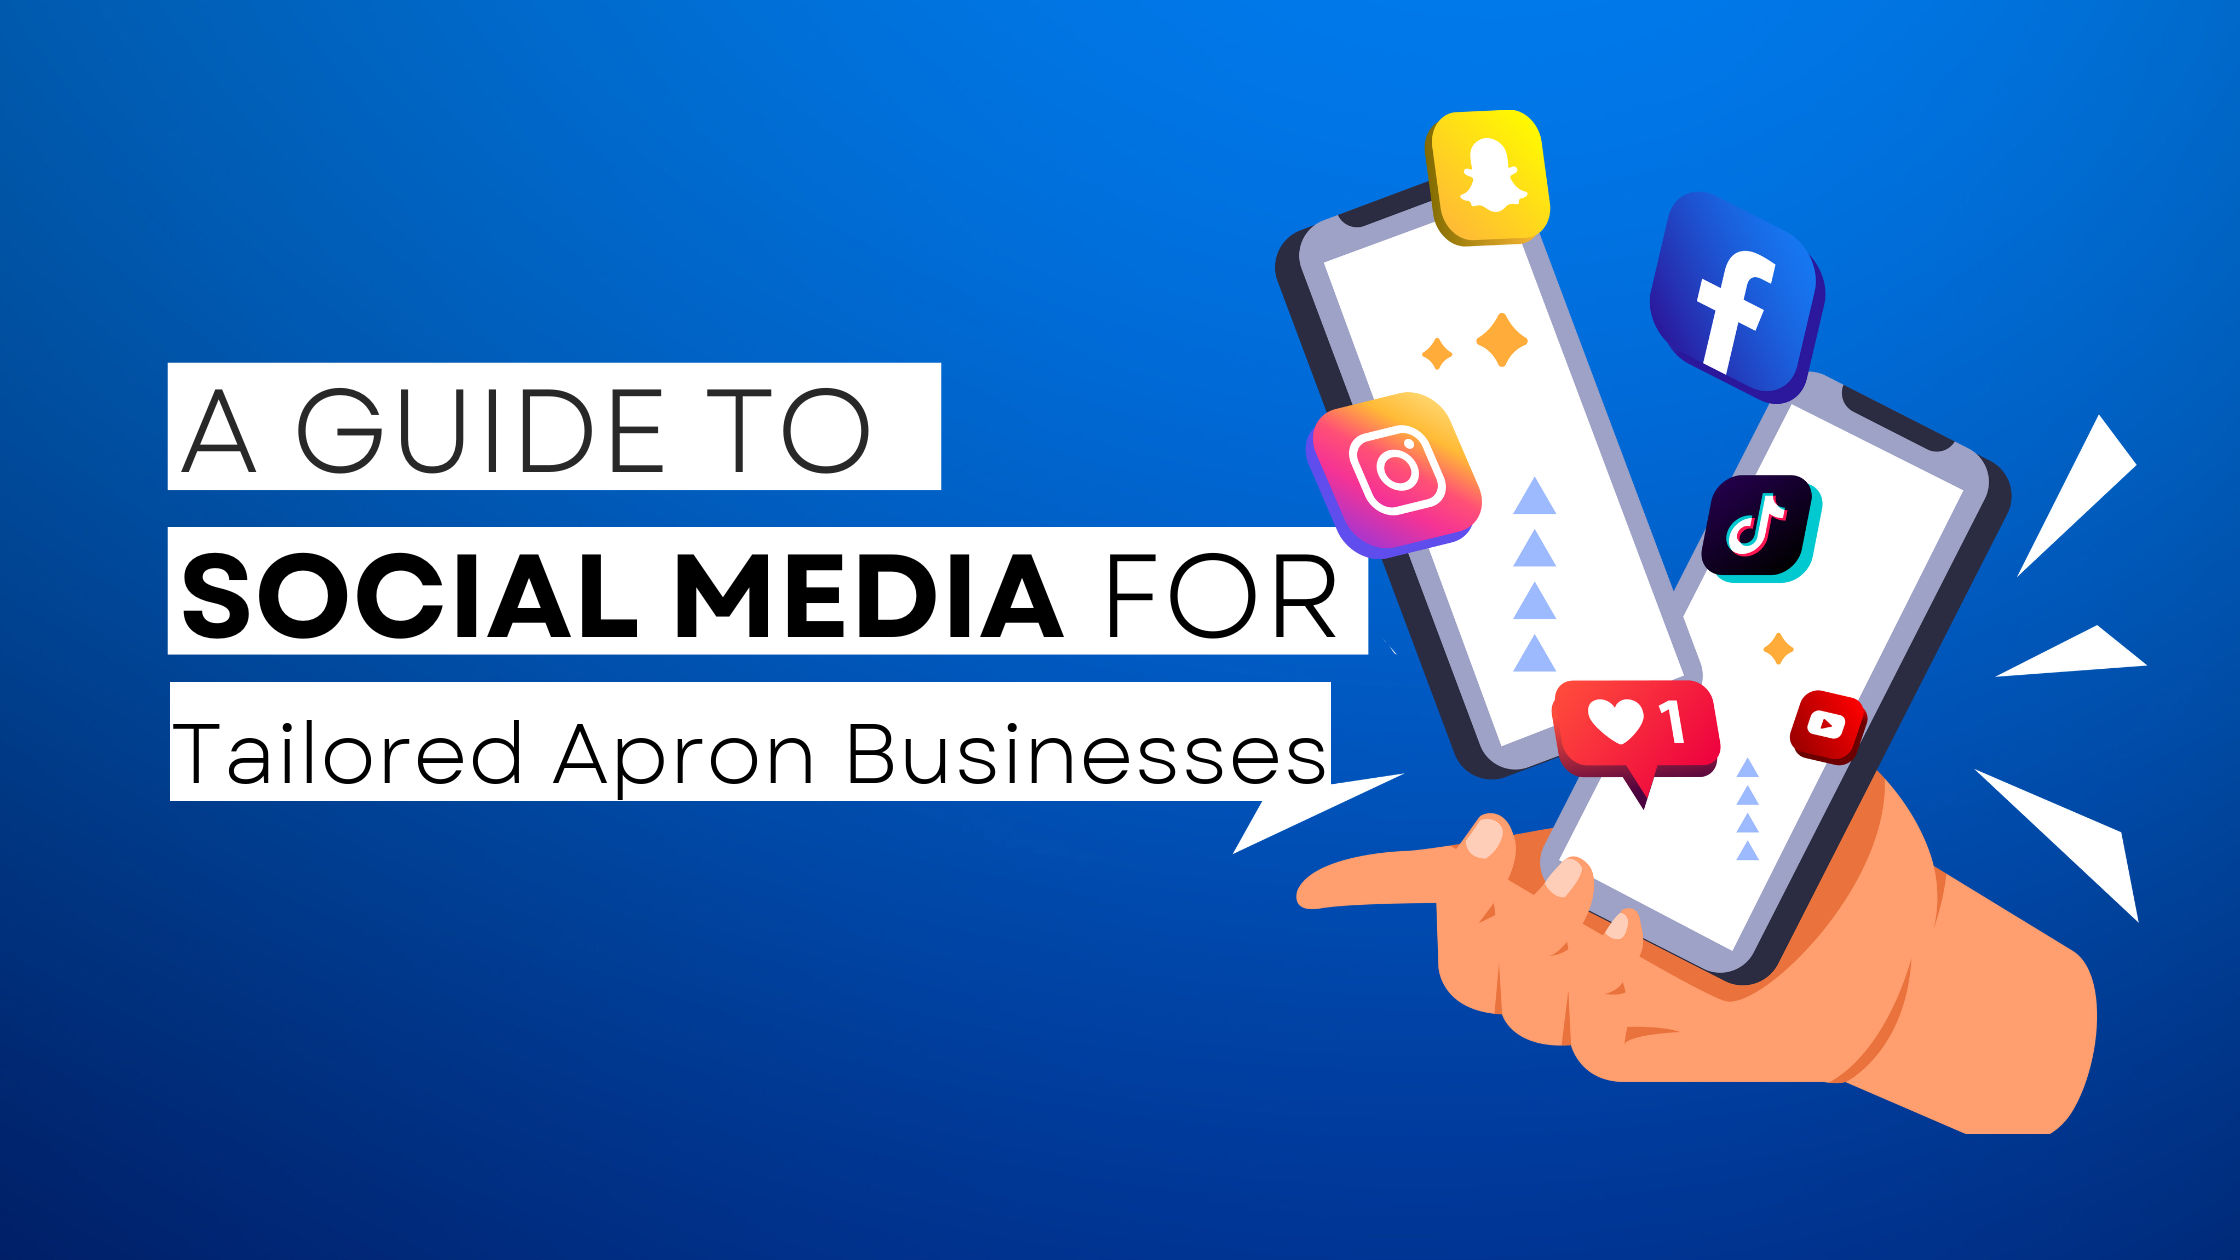 How to start Tailored Apron  on social media